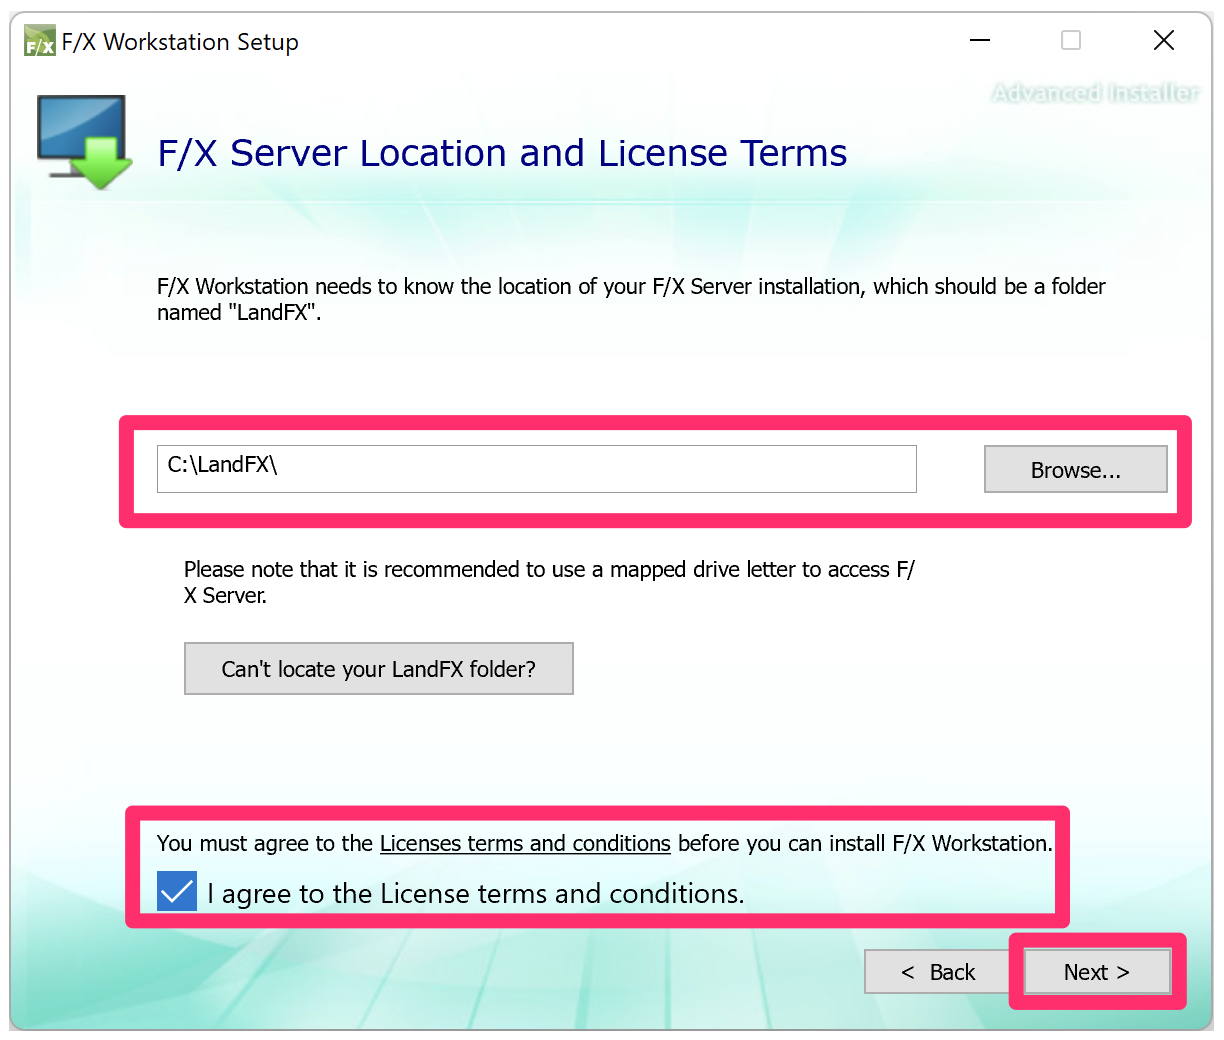 F/X Server Location and License Terms screen